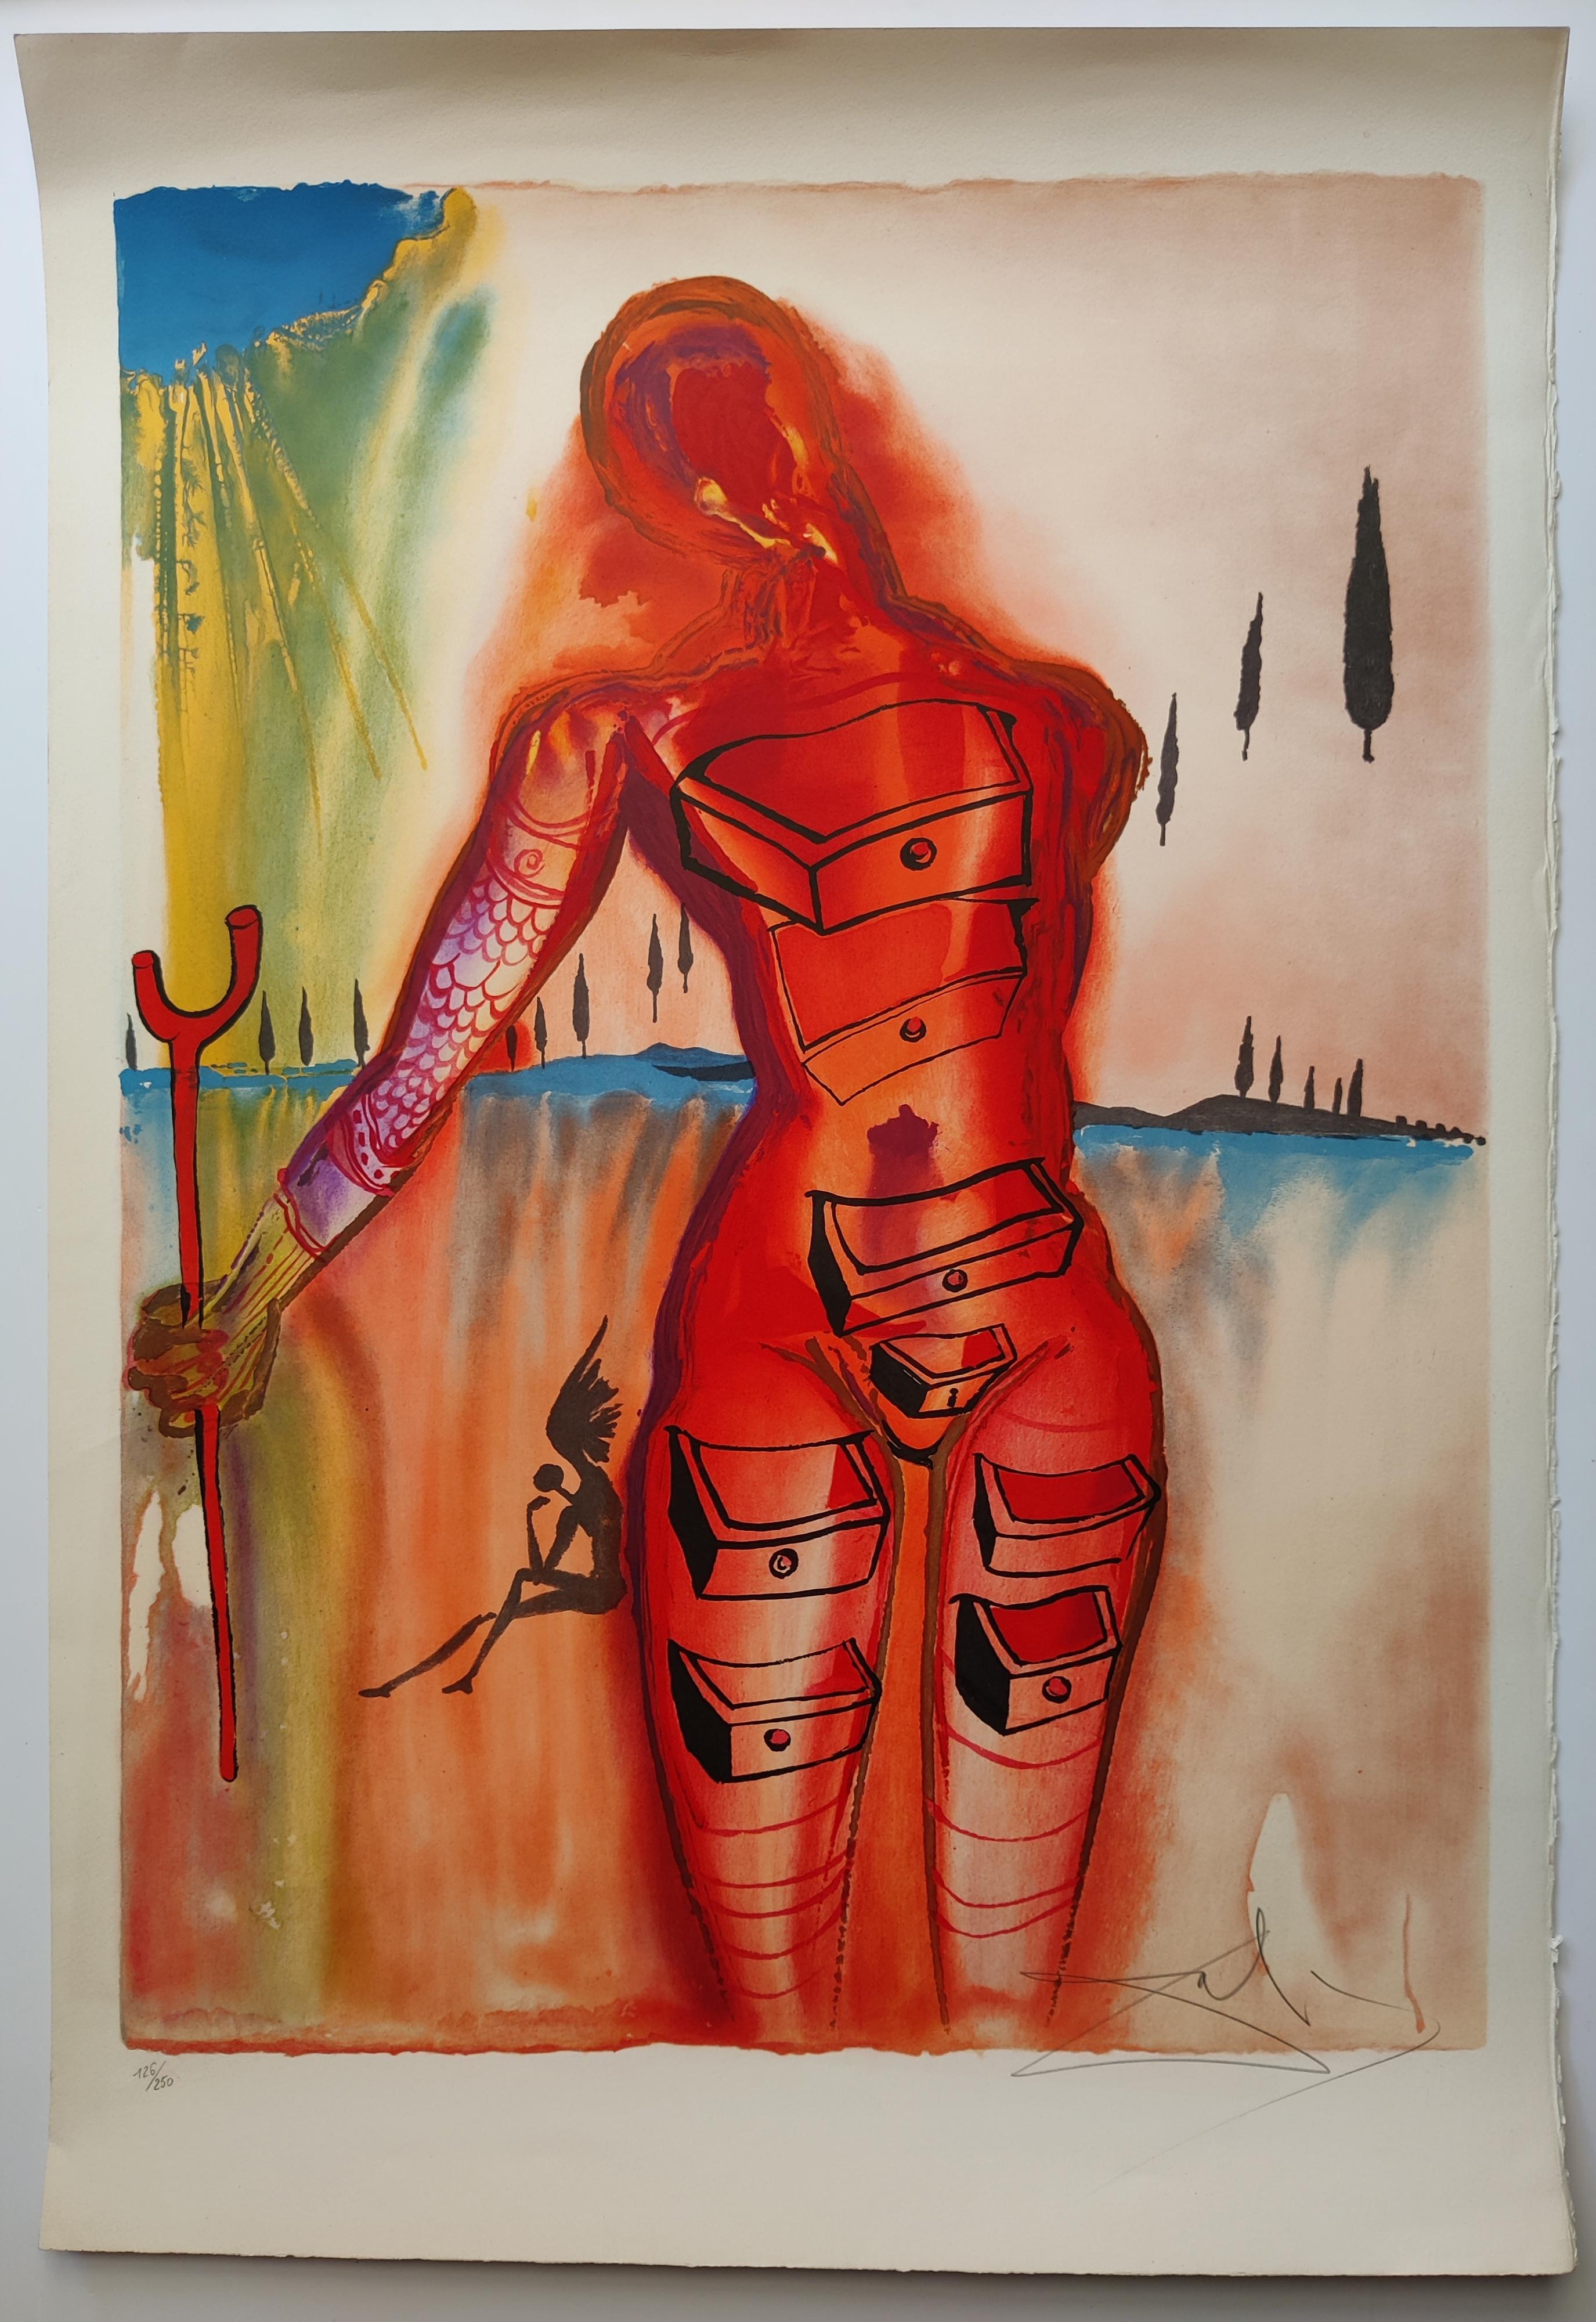 Salvador Dalí 
Dawn at Port Lligat (Venus with drawers), 1970
Lithograph
Hand-signed lower right
Edition 126/250
Sheet size: 90 x 61 cm
Image size: 75.5 x 56 cm
Purchased by Courtleigh Graphics
Reference Michler/Löpsinger 1284, Field 78-1